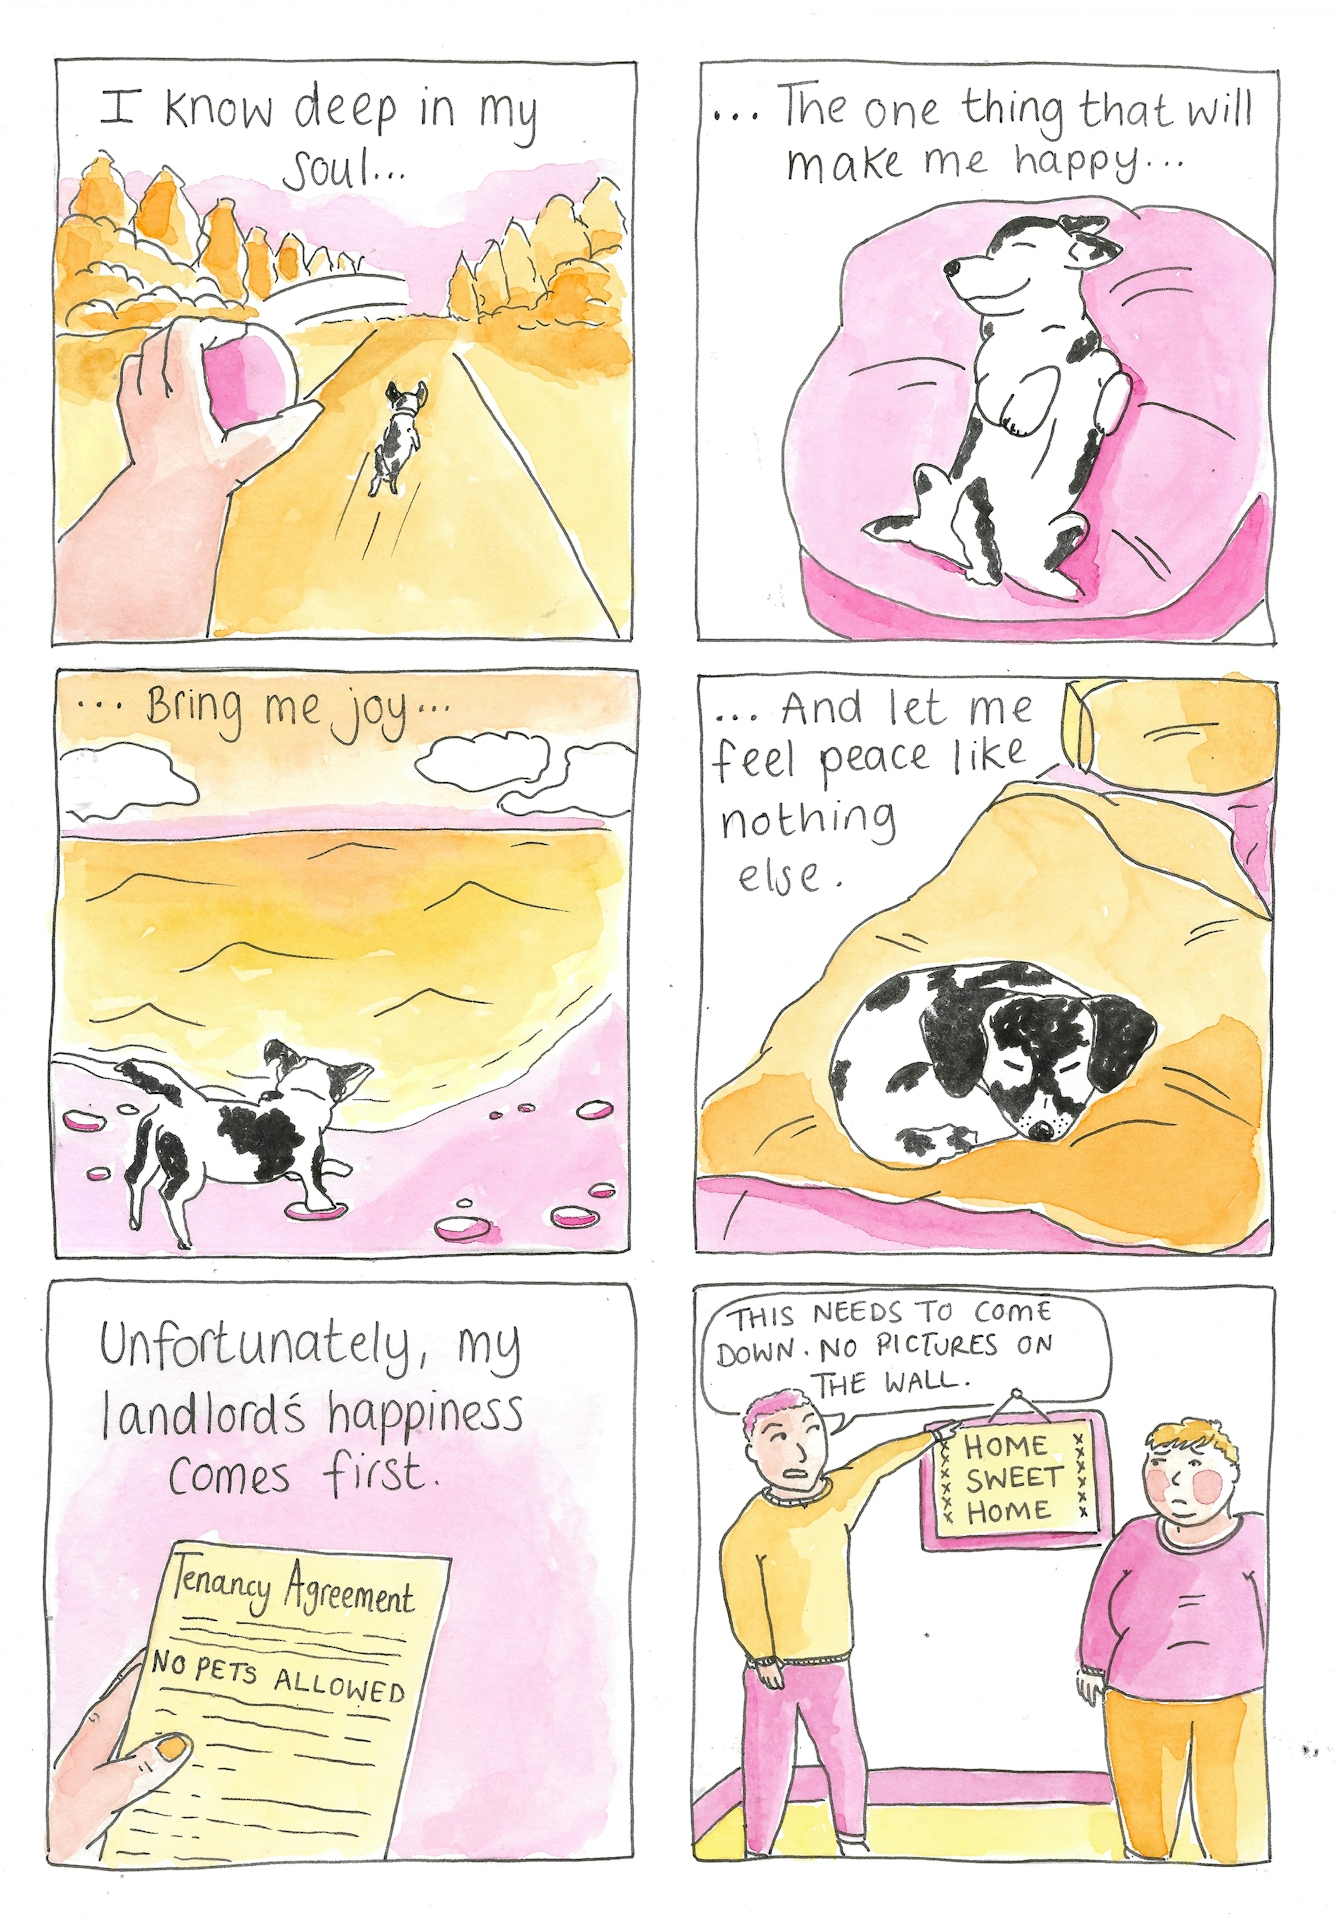 Panel 1: A hand throwing a ball into the distance as a small dog runs along the path playing fetch. Caption reads: "I know deep in my soul..."

Panel 2: The same dog lays on a big pillow showing its belly and smiling as if content. The caption continues: ..."The one thing that will make me happy..."

Panel 3: The same dog is on a beach, playing in the sea as the tide comes in. The caption continues: "...Bring me joy..."

Panel 4: The dog is curled up asleep on a bed. The caption continues: "...and let me feel peace like nothing else."

Panel 5: A close-up of a tenancy agreement with the words highlighted 'NO PETS ALLOWED.' The caption reads :"Unfortunately my landlord's happiness comes first."

Panel 6: A landlord angrily points at a framed picture on the wall which reads 'Home Sweet Home' and tells a sad looking tenant "This needs to come down. No pictures on the wall.'